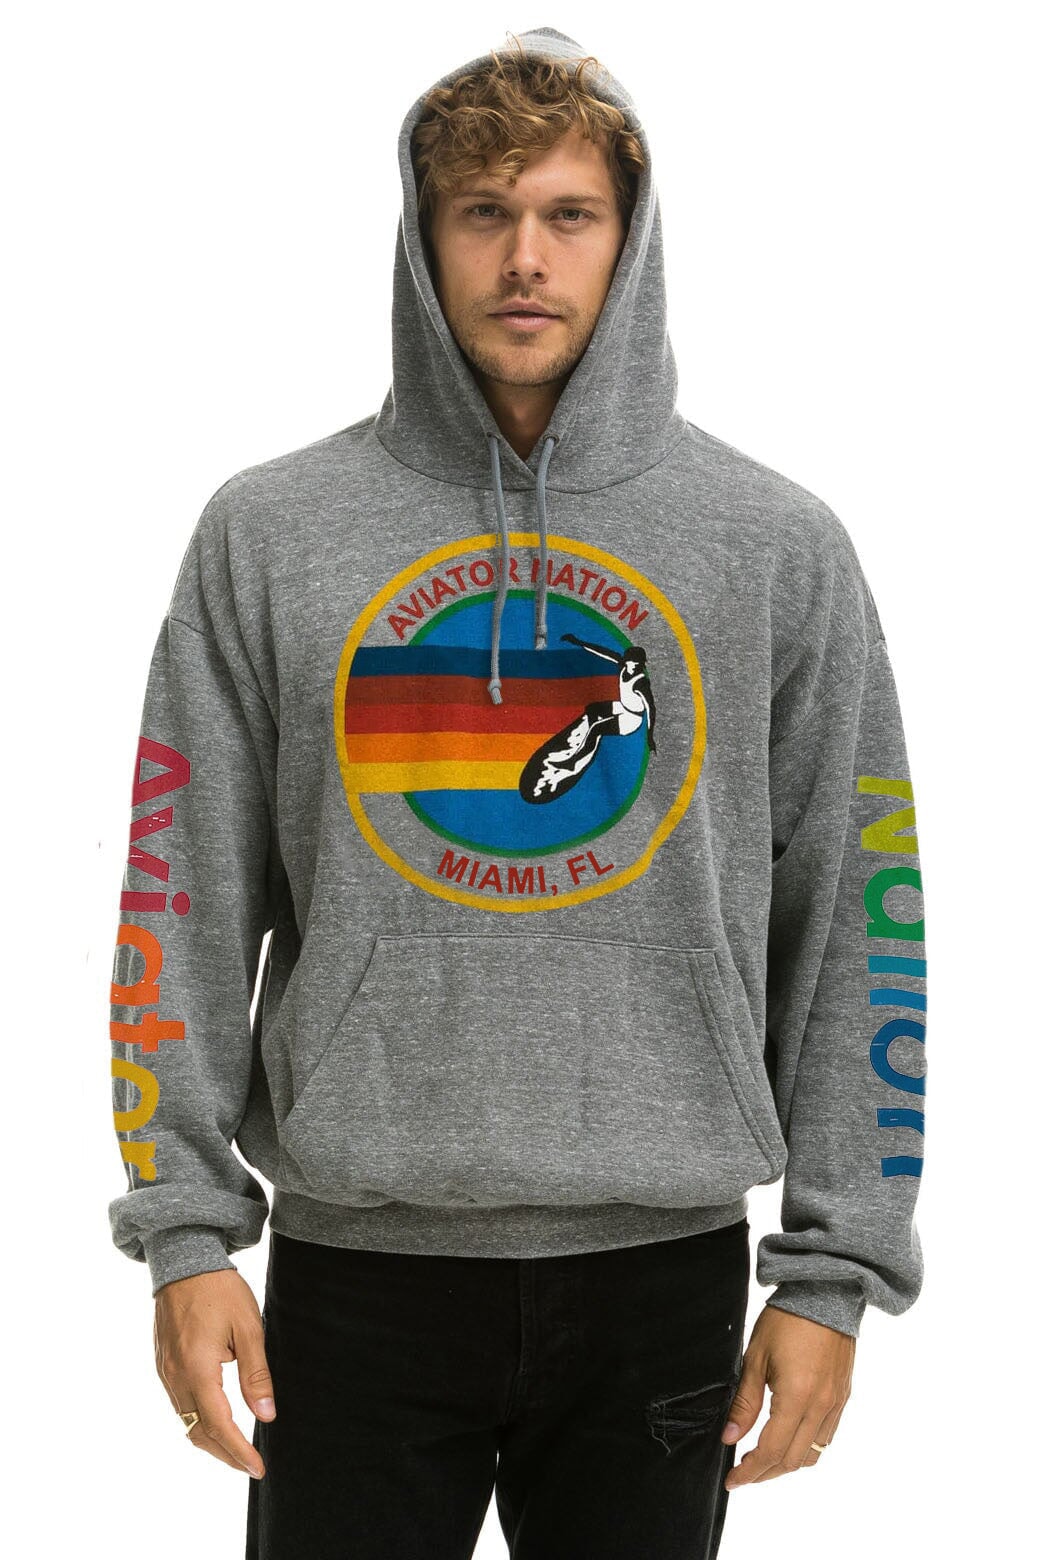 AVIATOR NATION MIAMI RELAXED PULLOVER HOODIE - HEATHER GREY Hoodie Aviator Nation 